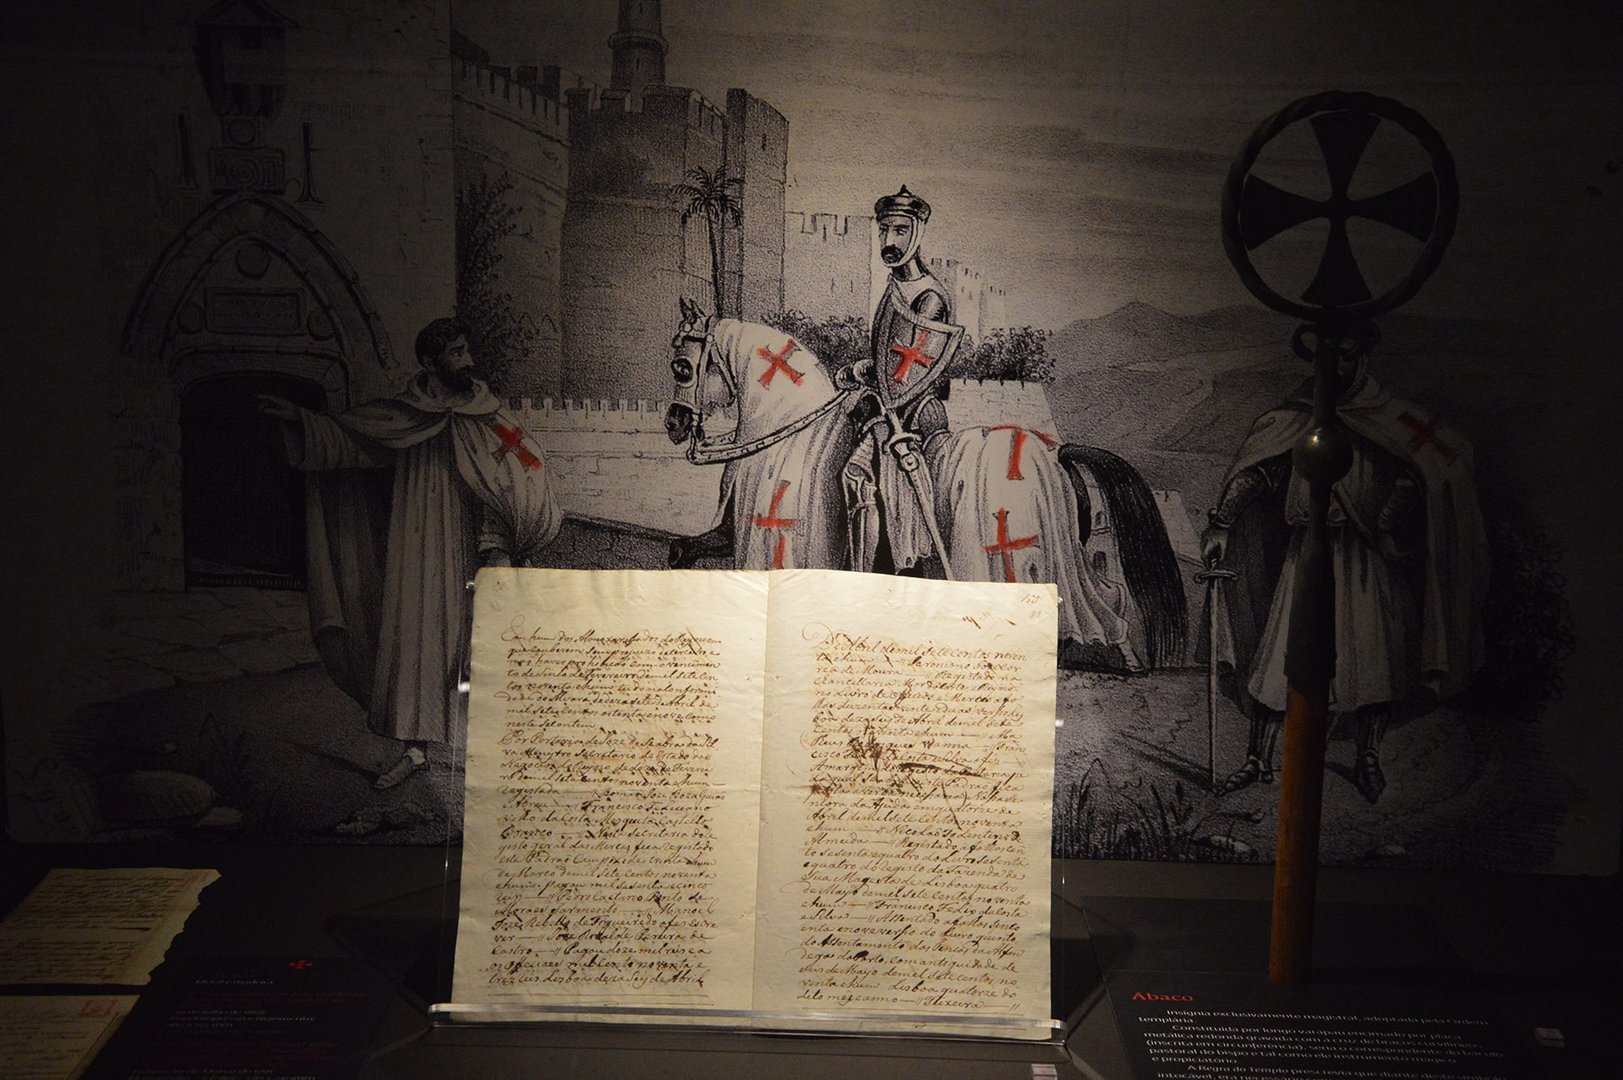 The Templar Interpretation Centre of Almourol is the first of its kind in Portugal